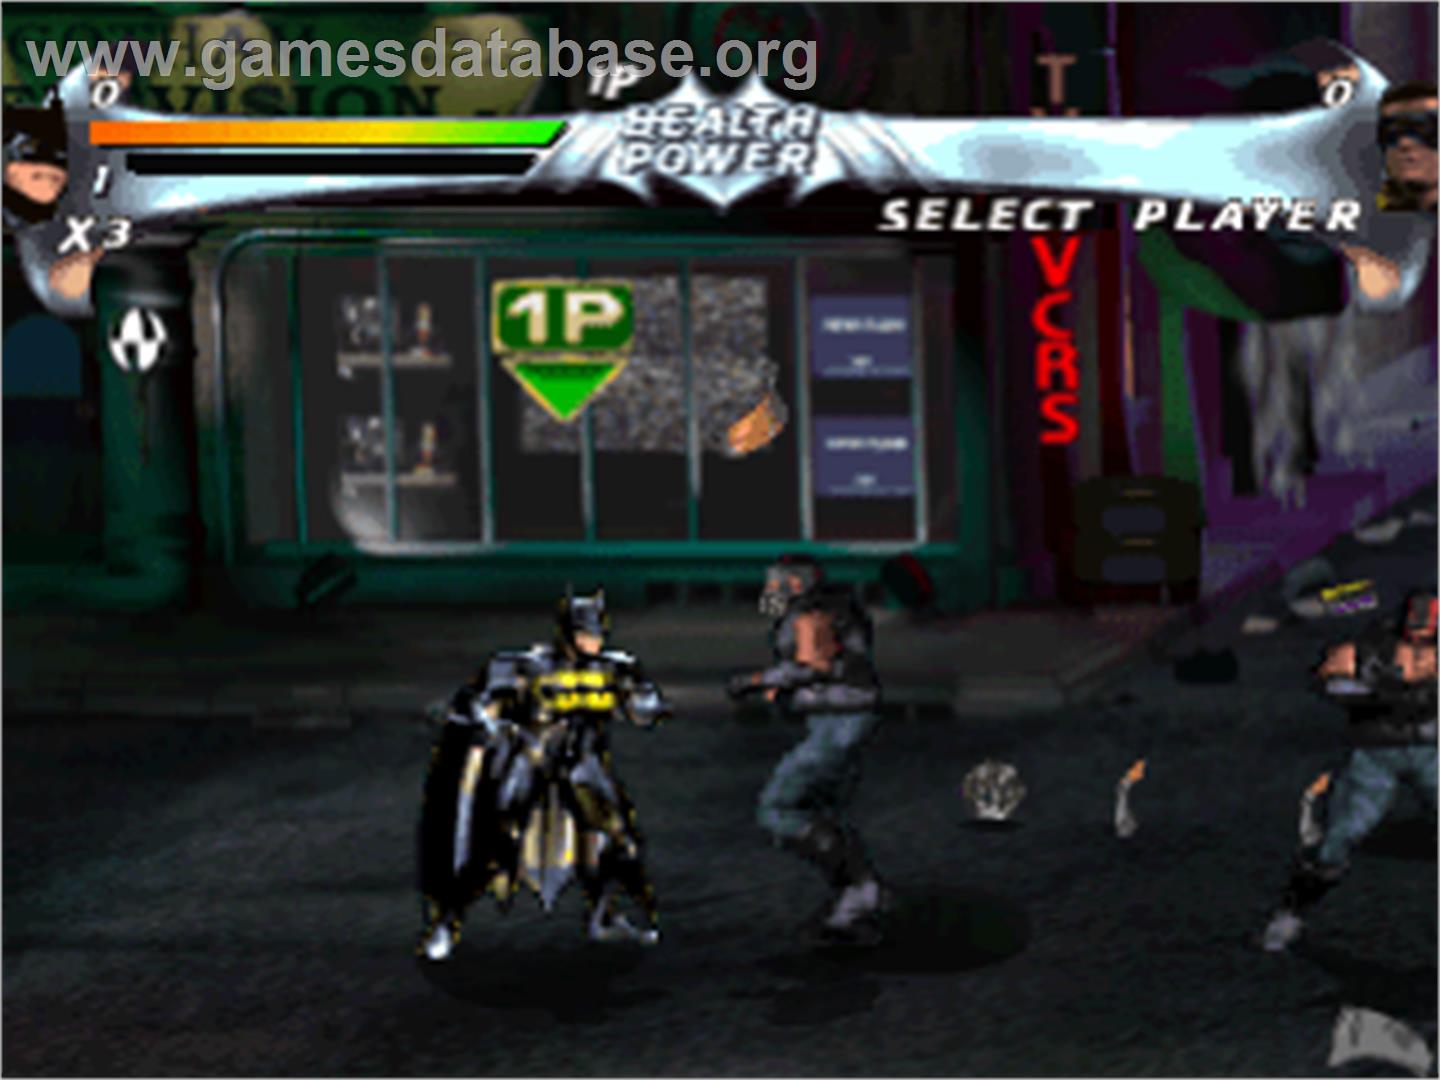 Batman Forever: The Arcade Game - Sony Playstation - Artwork - In Game